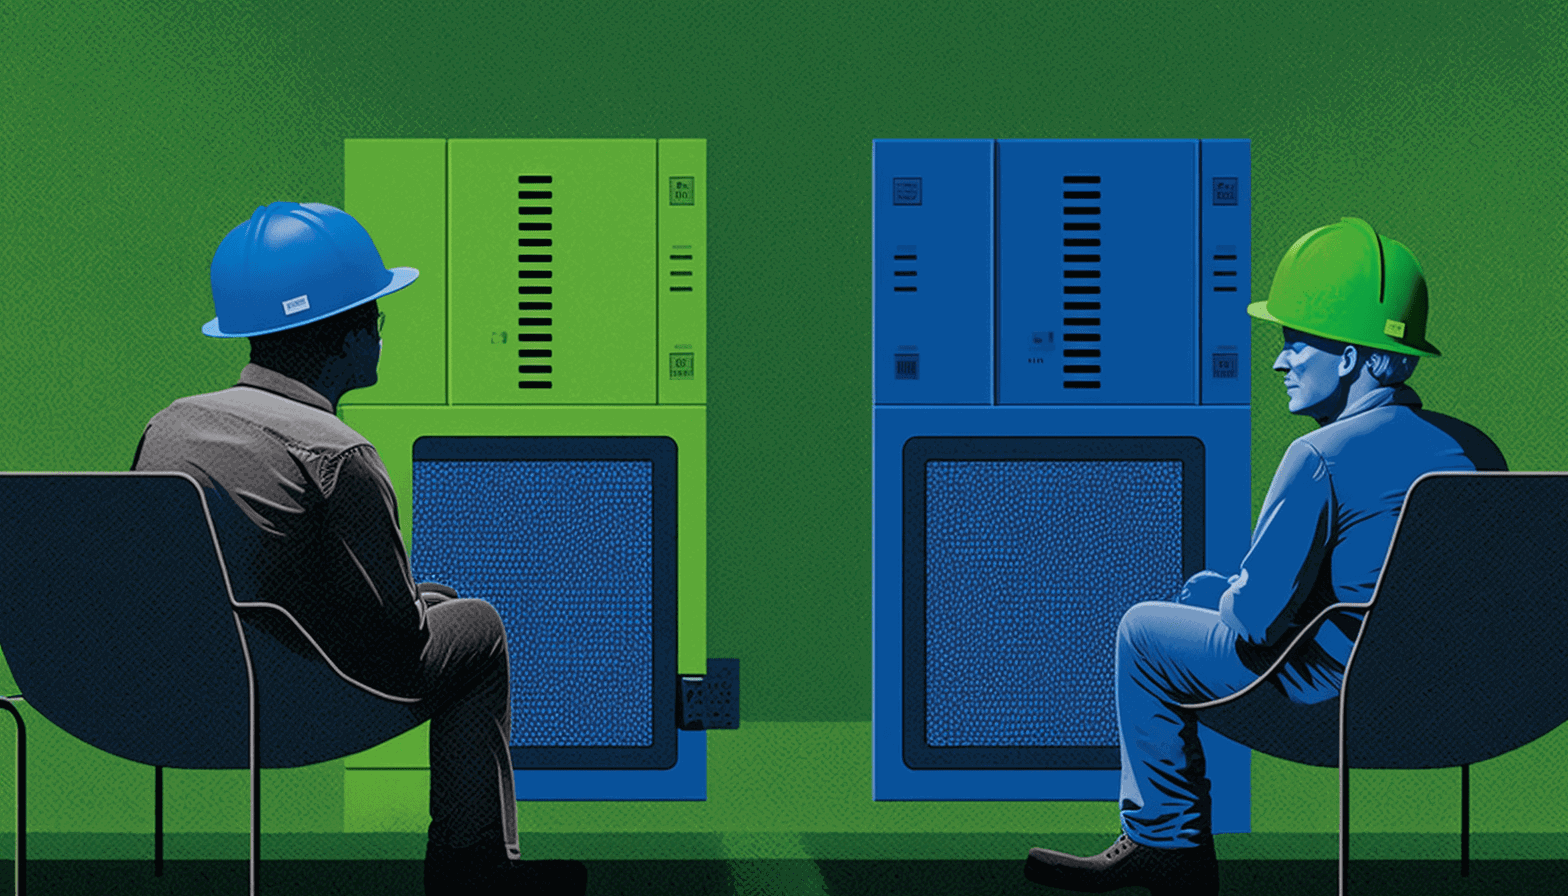 Two servers facing each other, one blue, one green. On the blue side a person stands wearing a hardhat and safety vest. On the green side a person sitting on the couch.